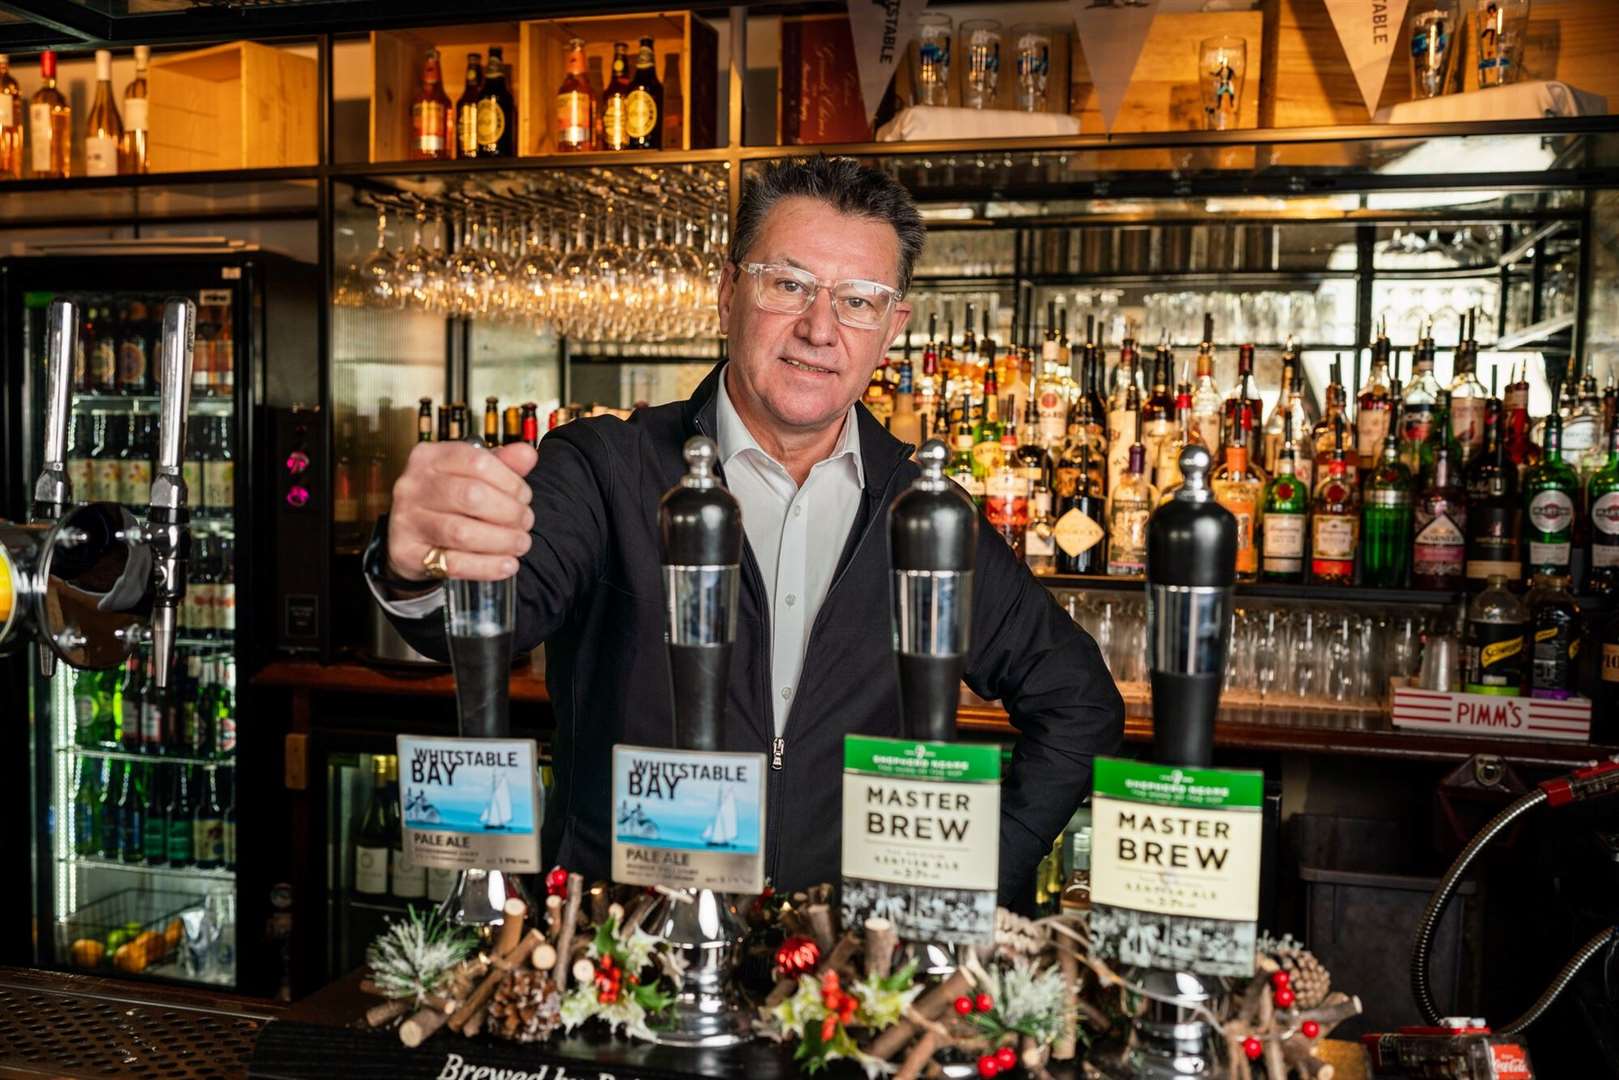 General Manager of The Royal Albion Hotel Marc Duvauchelle. Picture: Shepherd Neame